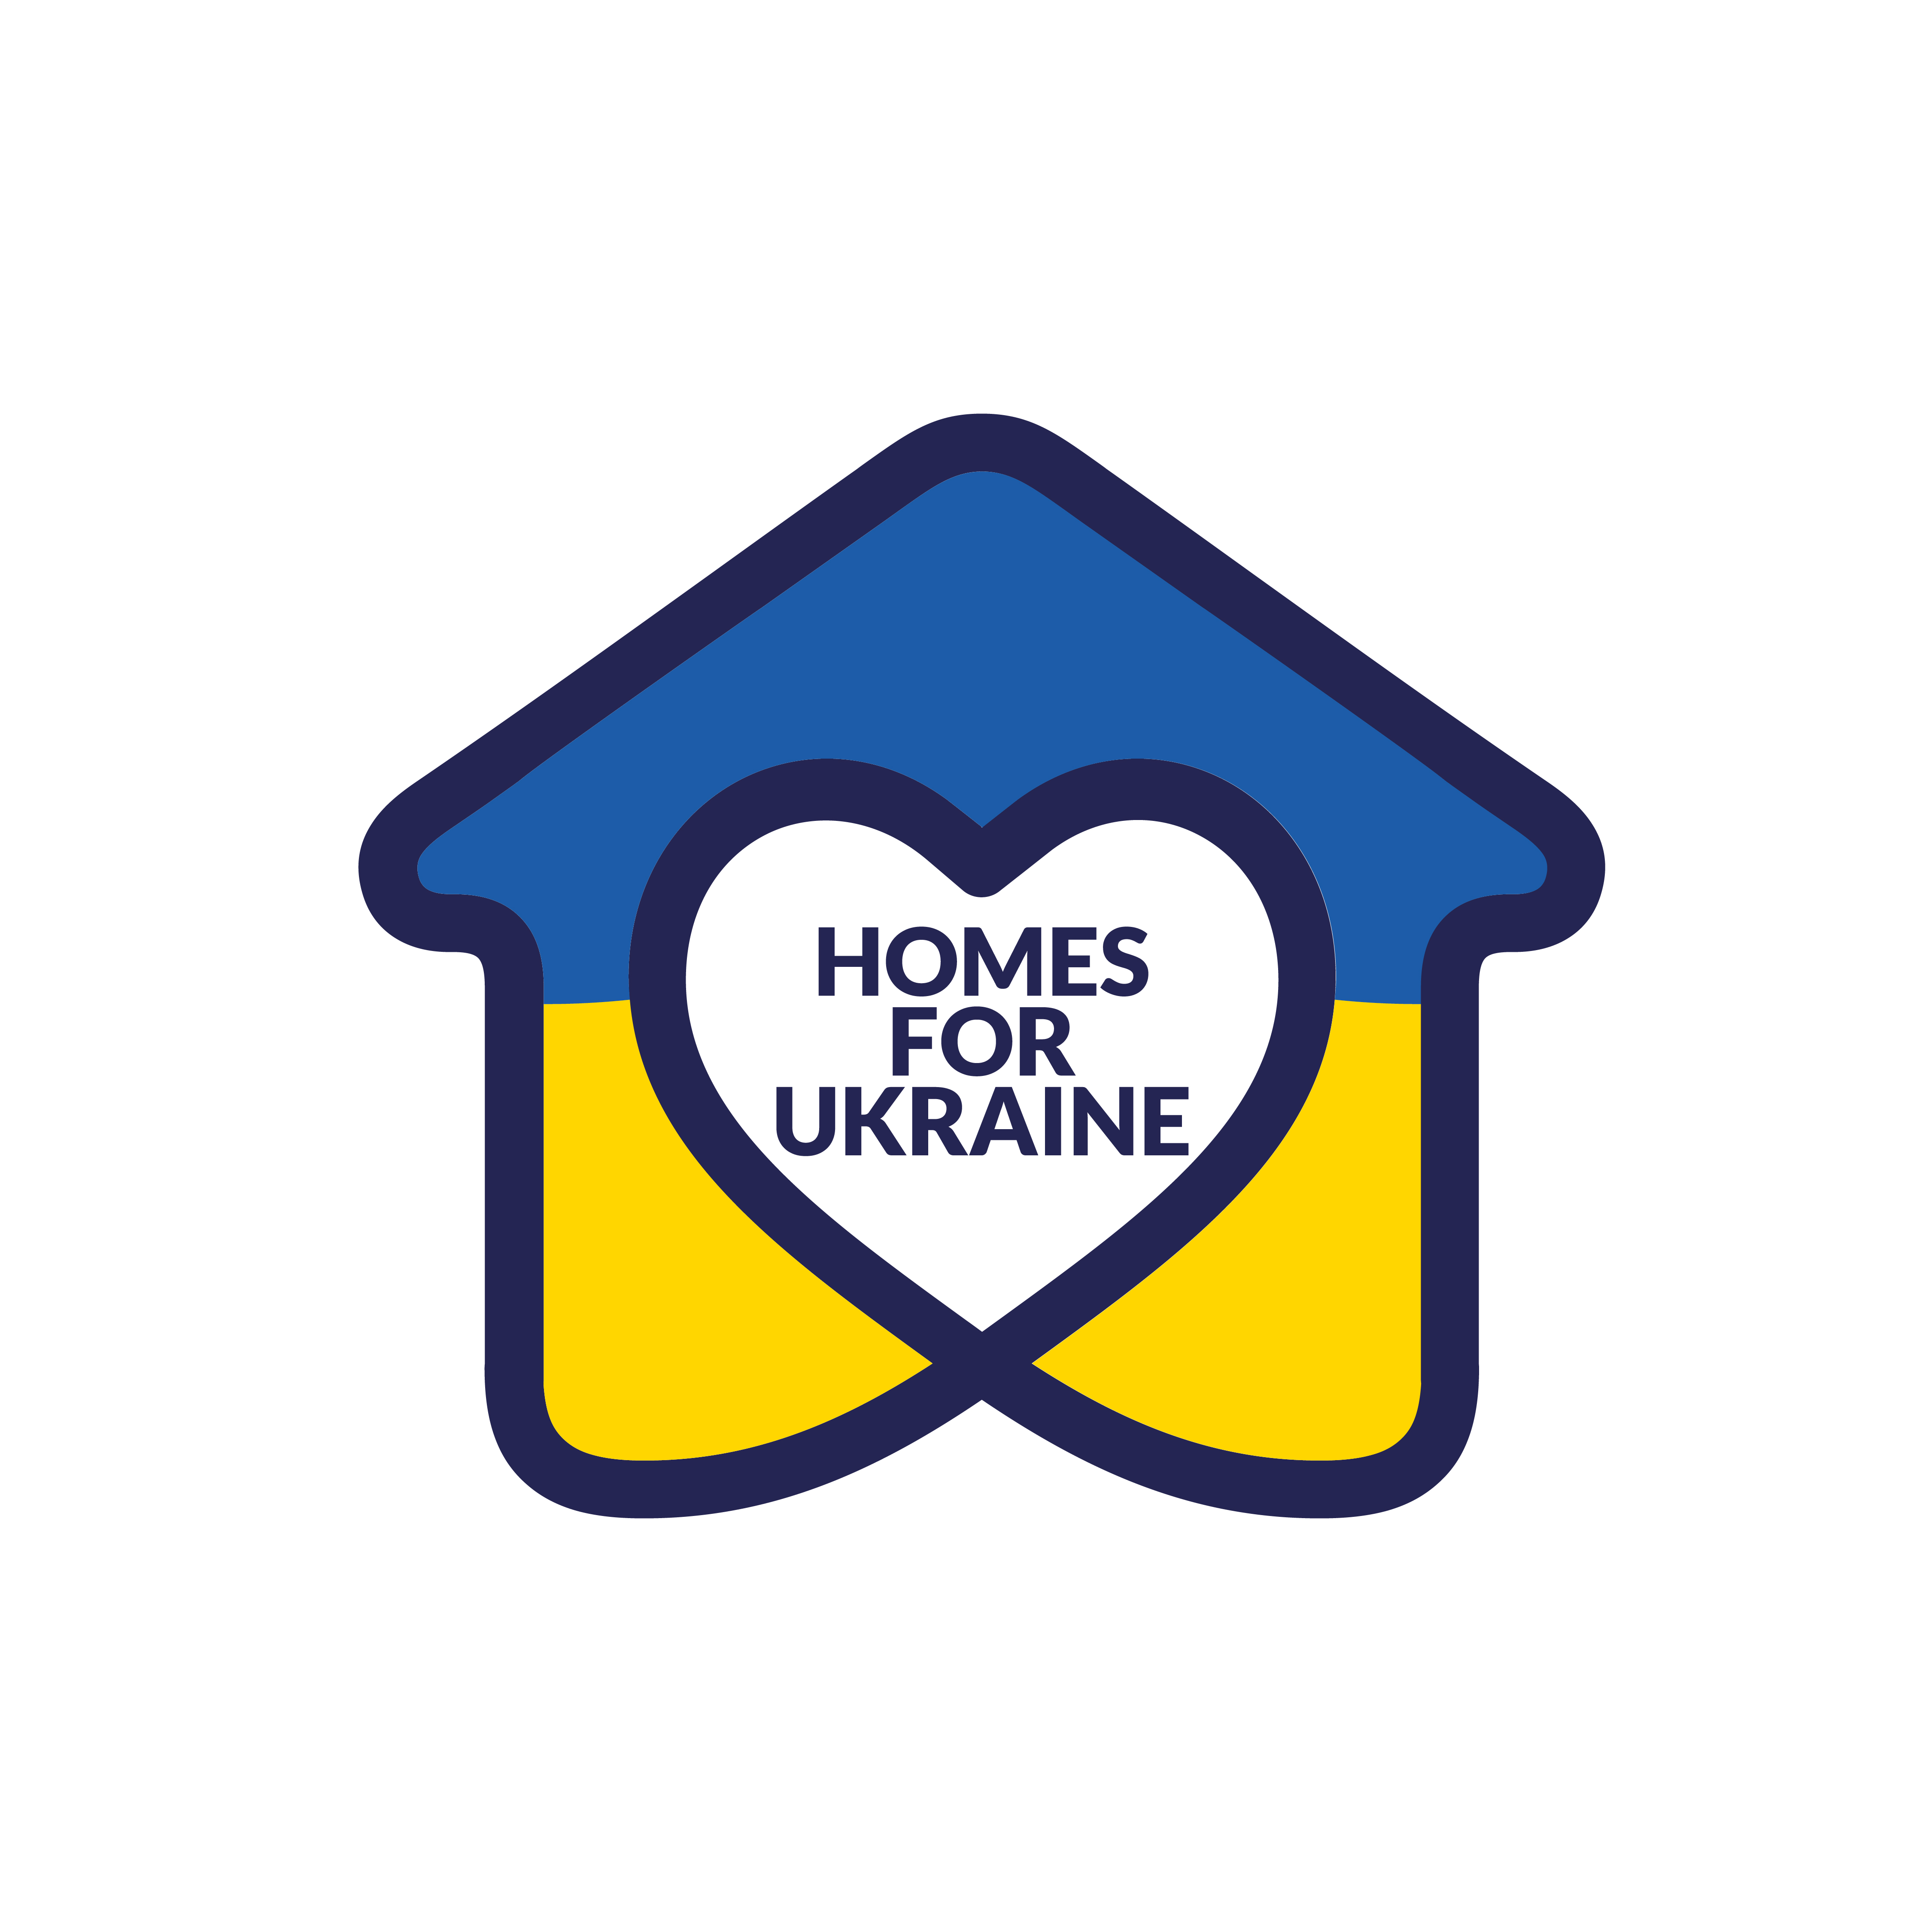 Continued support for Ukrainian refugees in Warwickshire